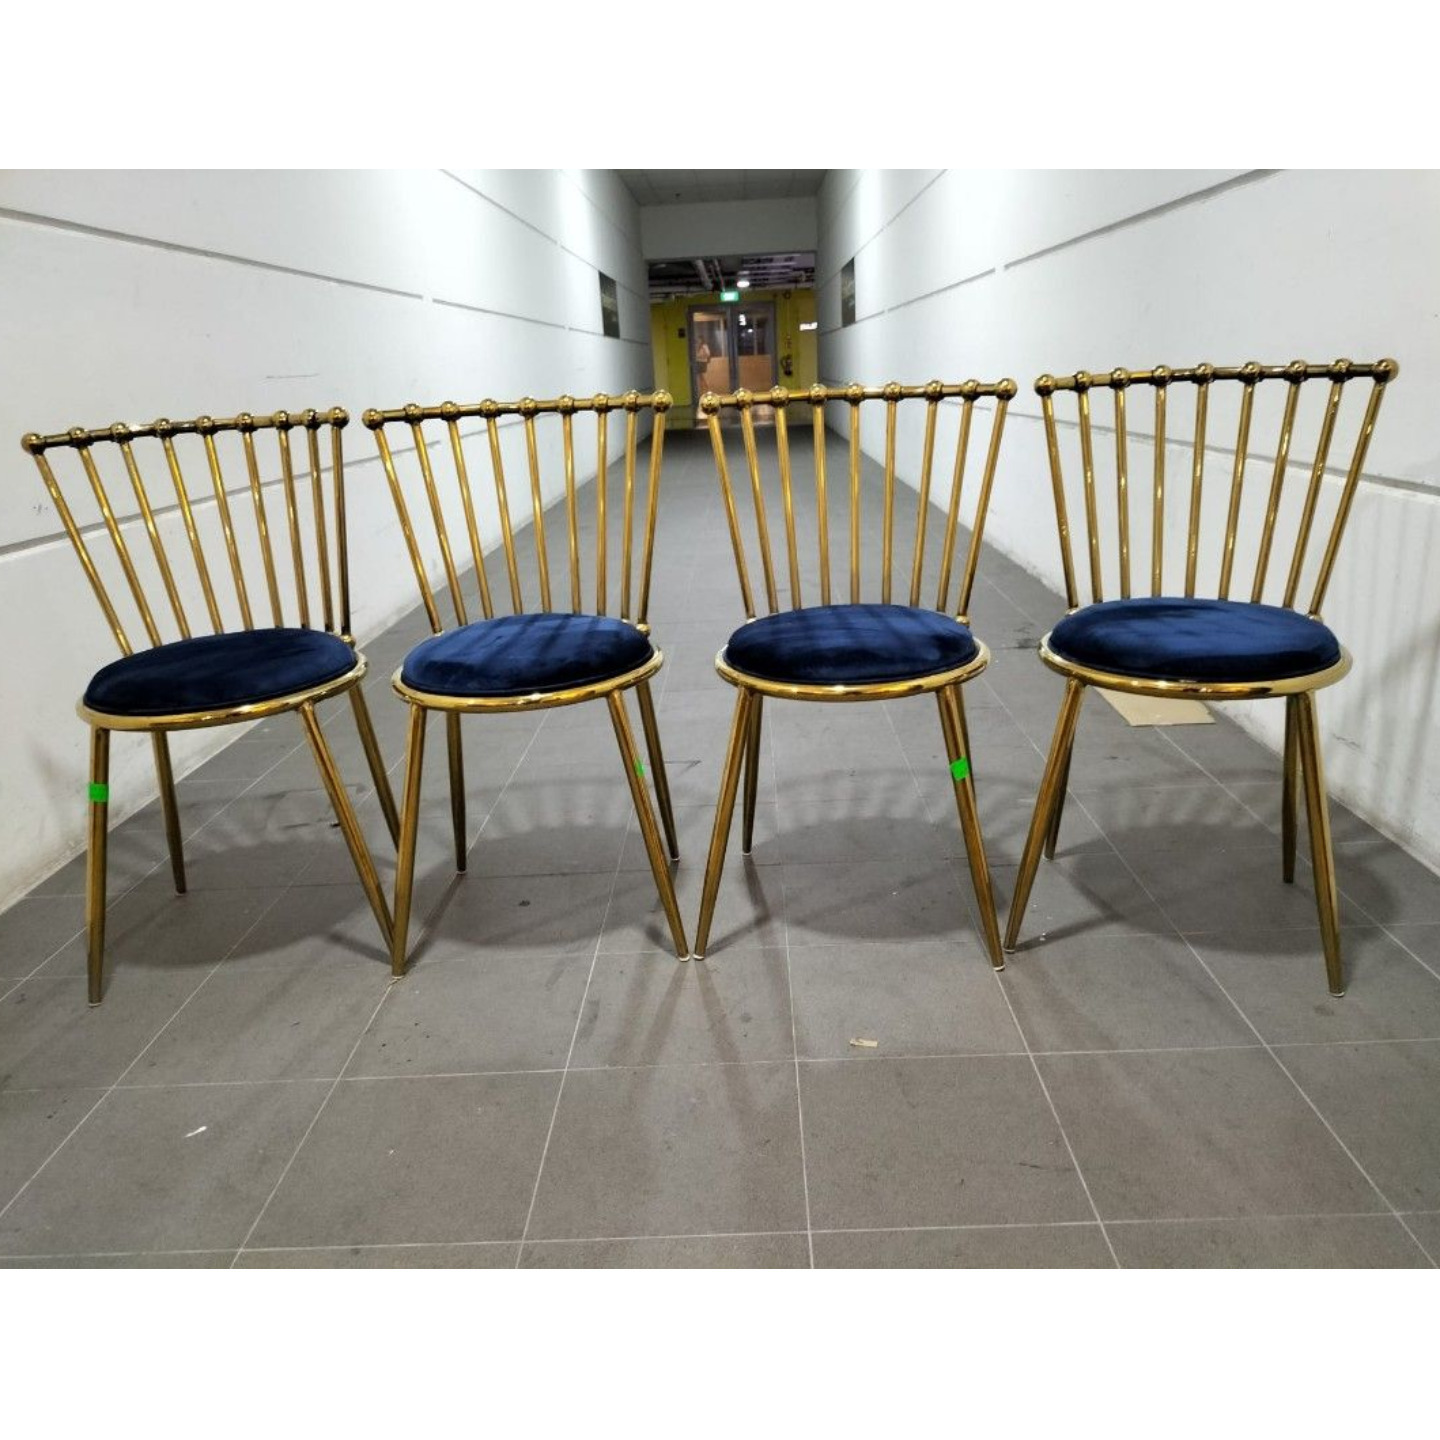 FIRE SALE - 4pcs UTORIA Chairs in GOLD Frame with Velvet Blue Cushion